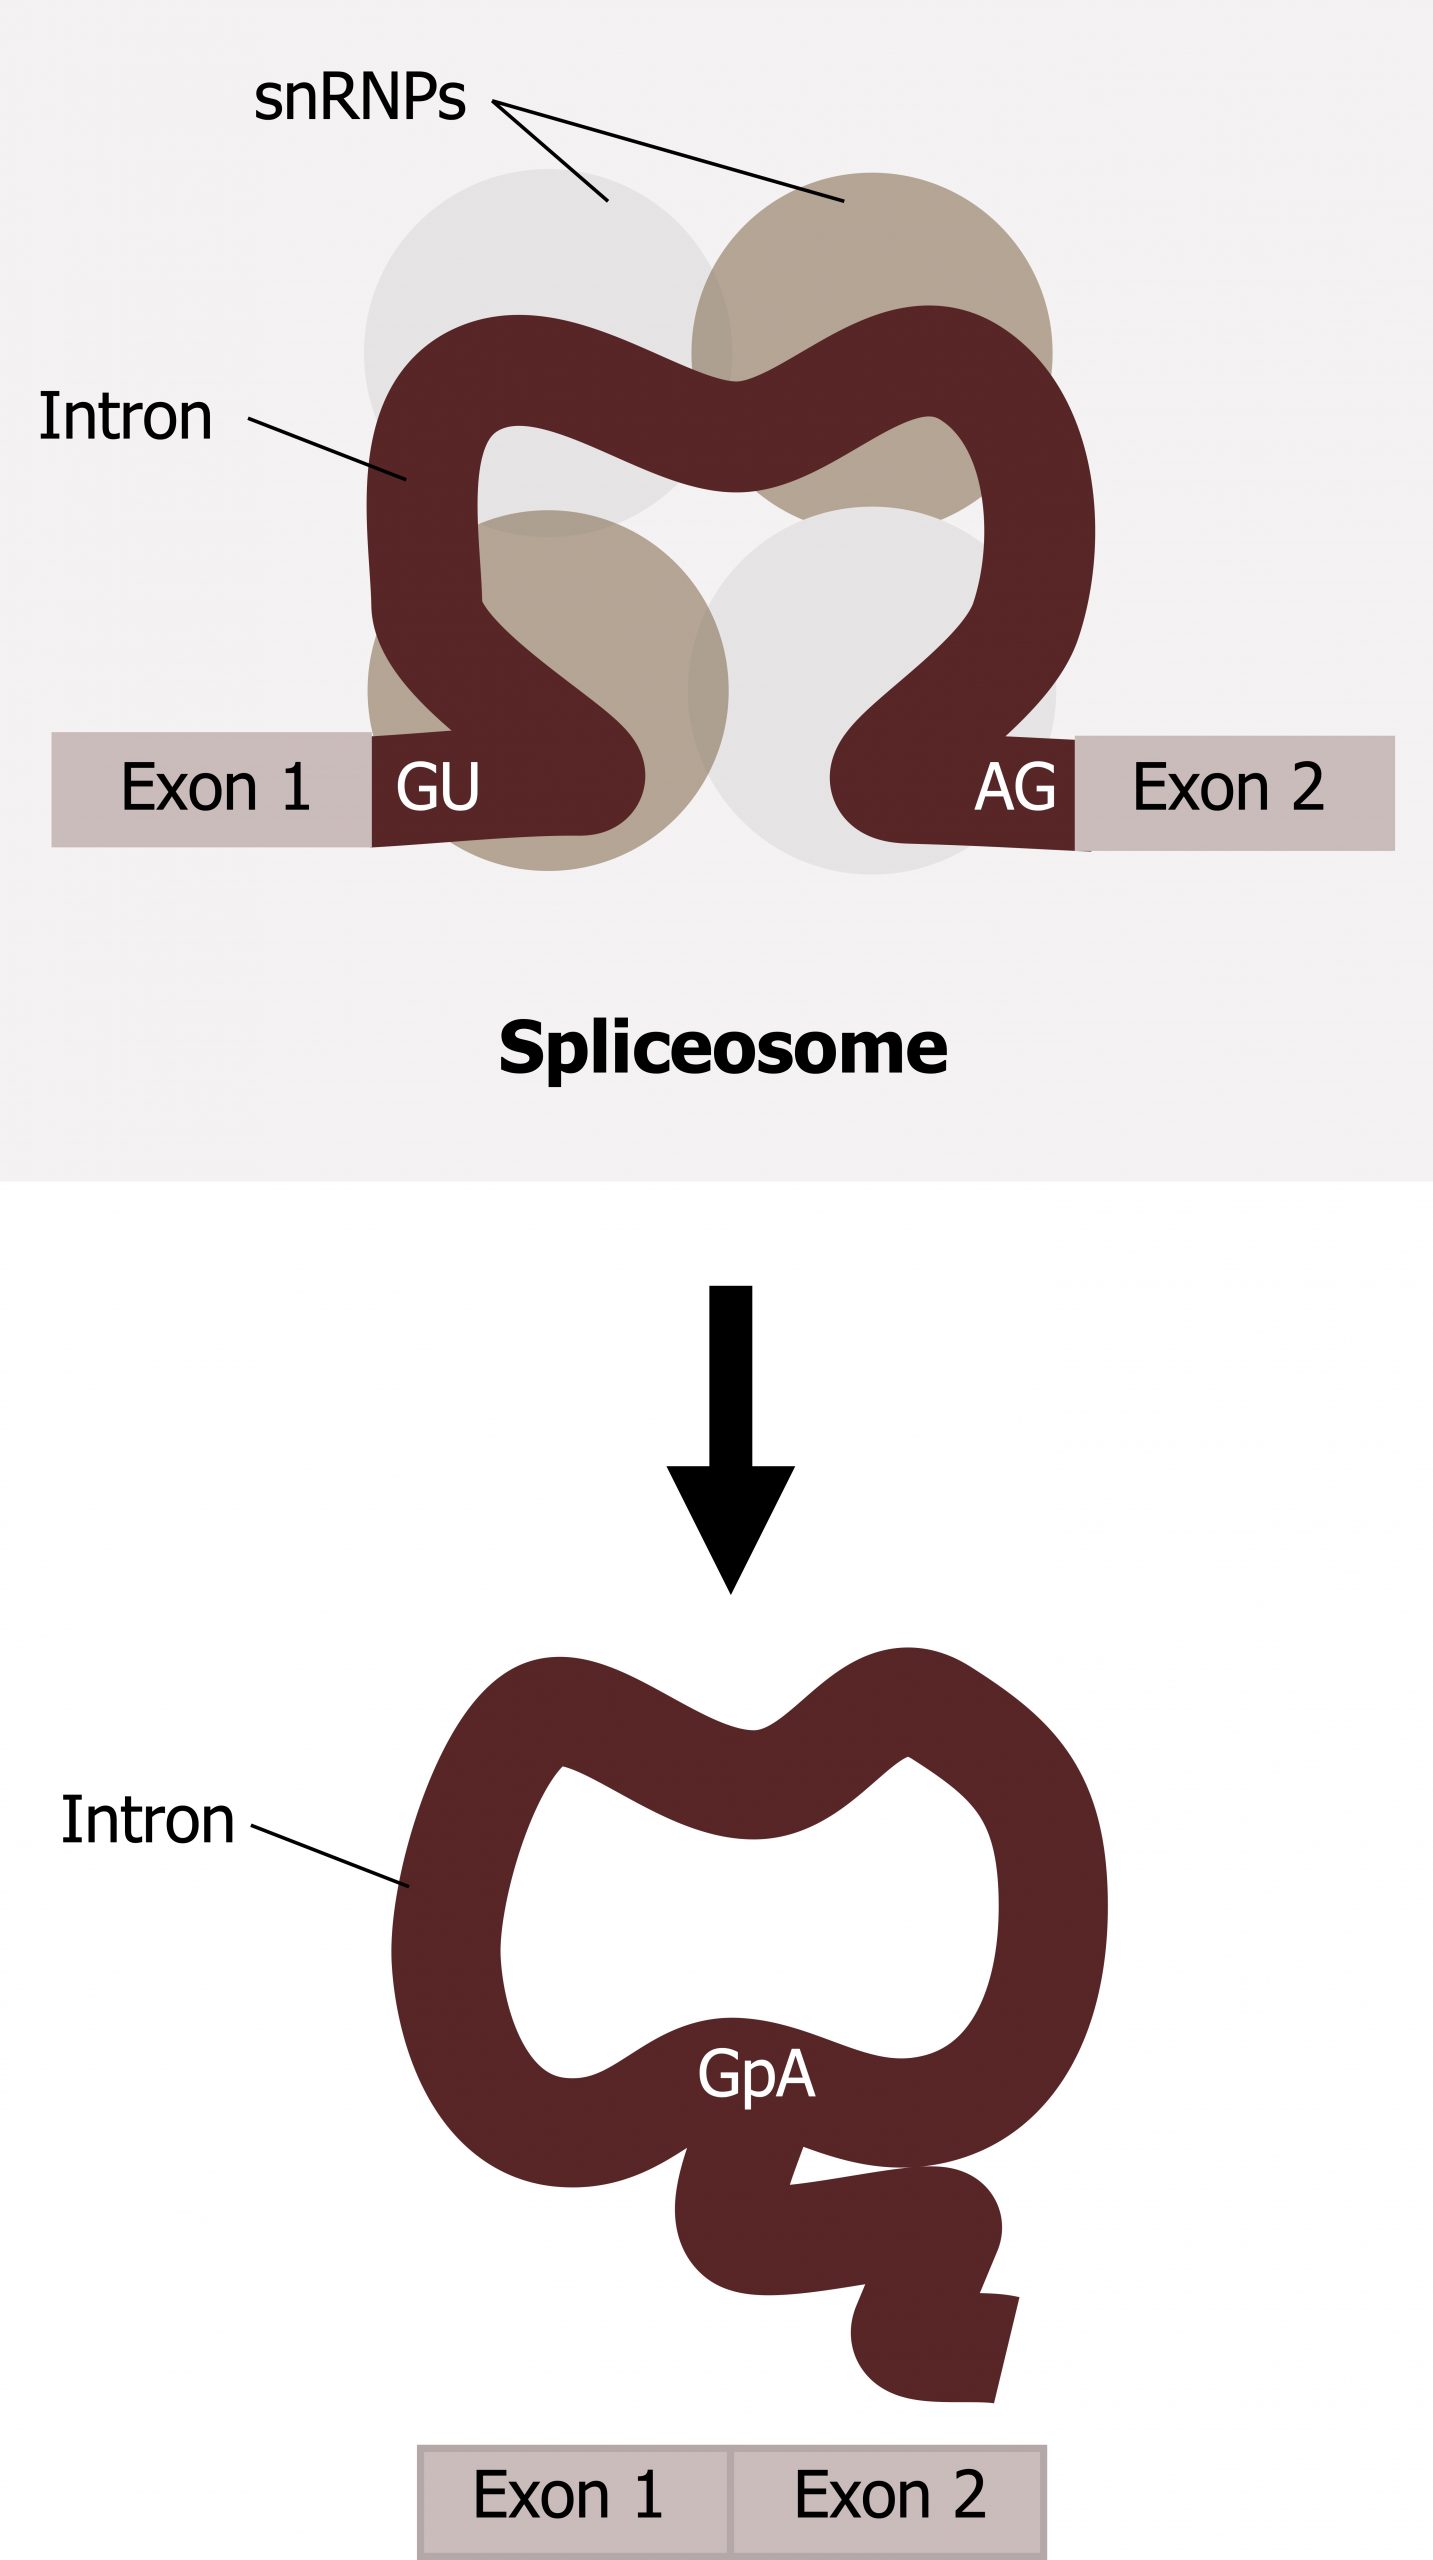 The spliceosome consists of exon 1, intron, exon 2. There are 3 bound snRNPs to the intron causing it to fold upwards into a half circle. Arrow to the intron removed and connected in a circular shape. Exons 1 and 2 are connected linearly.